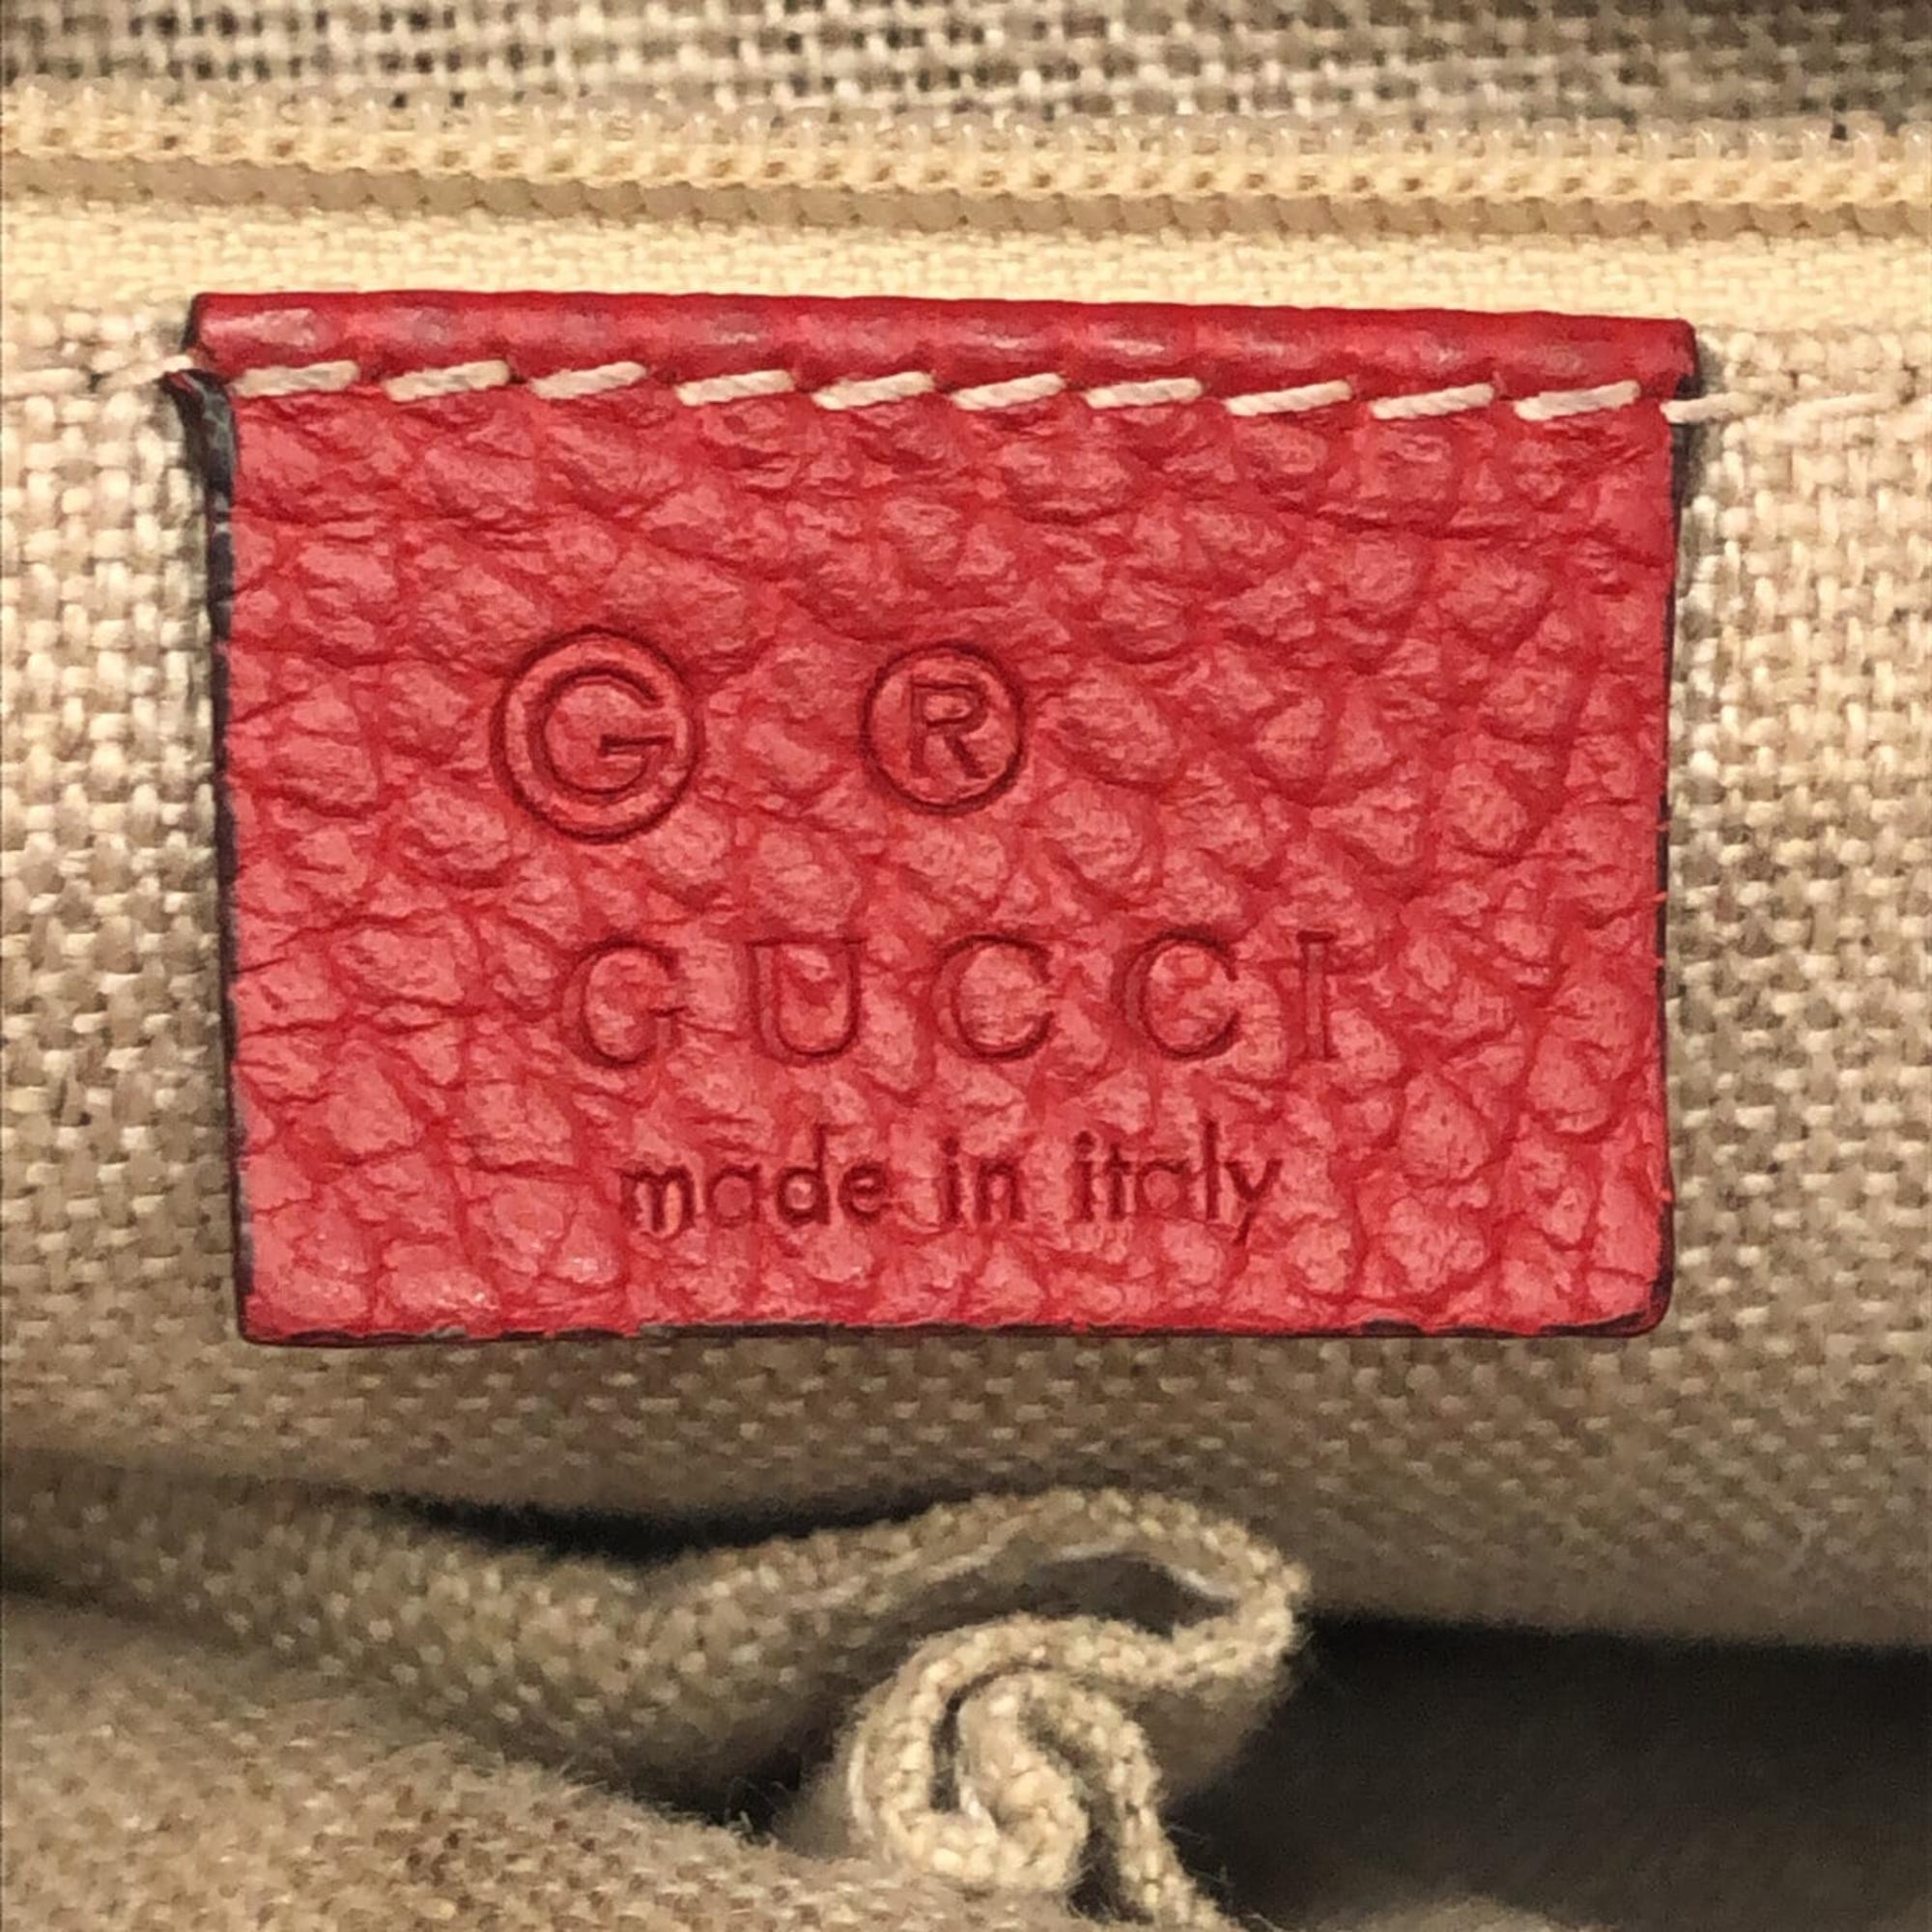 Gucci Pink Leather And Canvas Small Bree Tote Bag